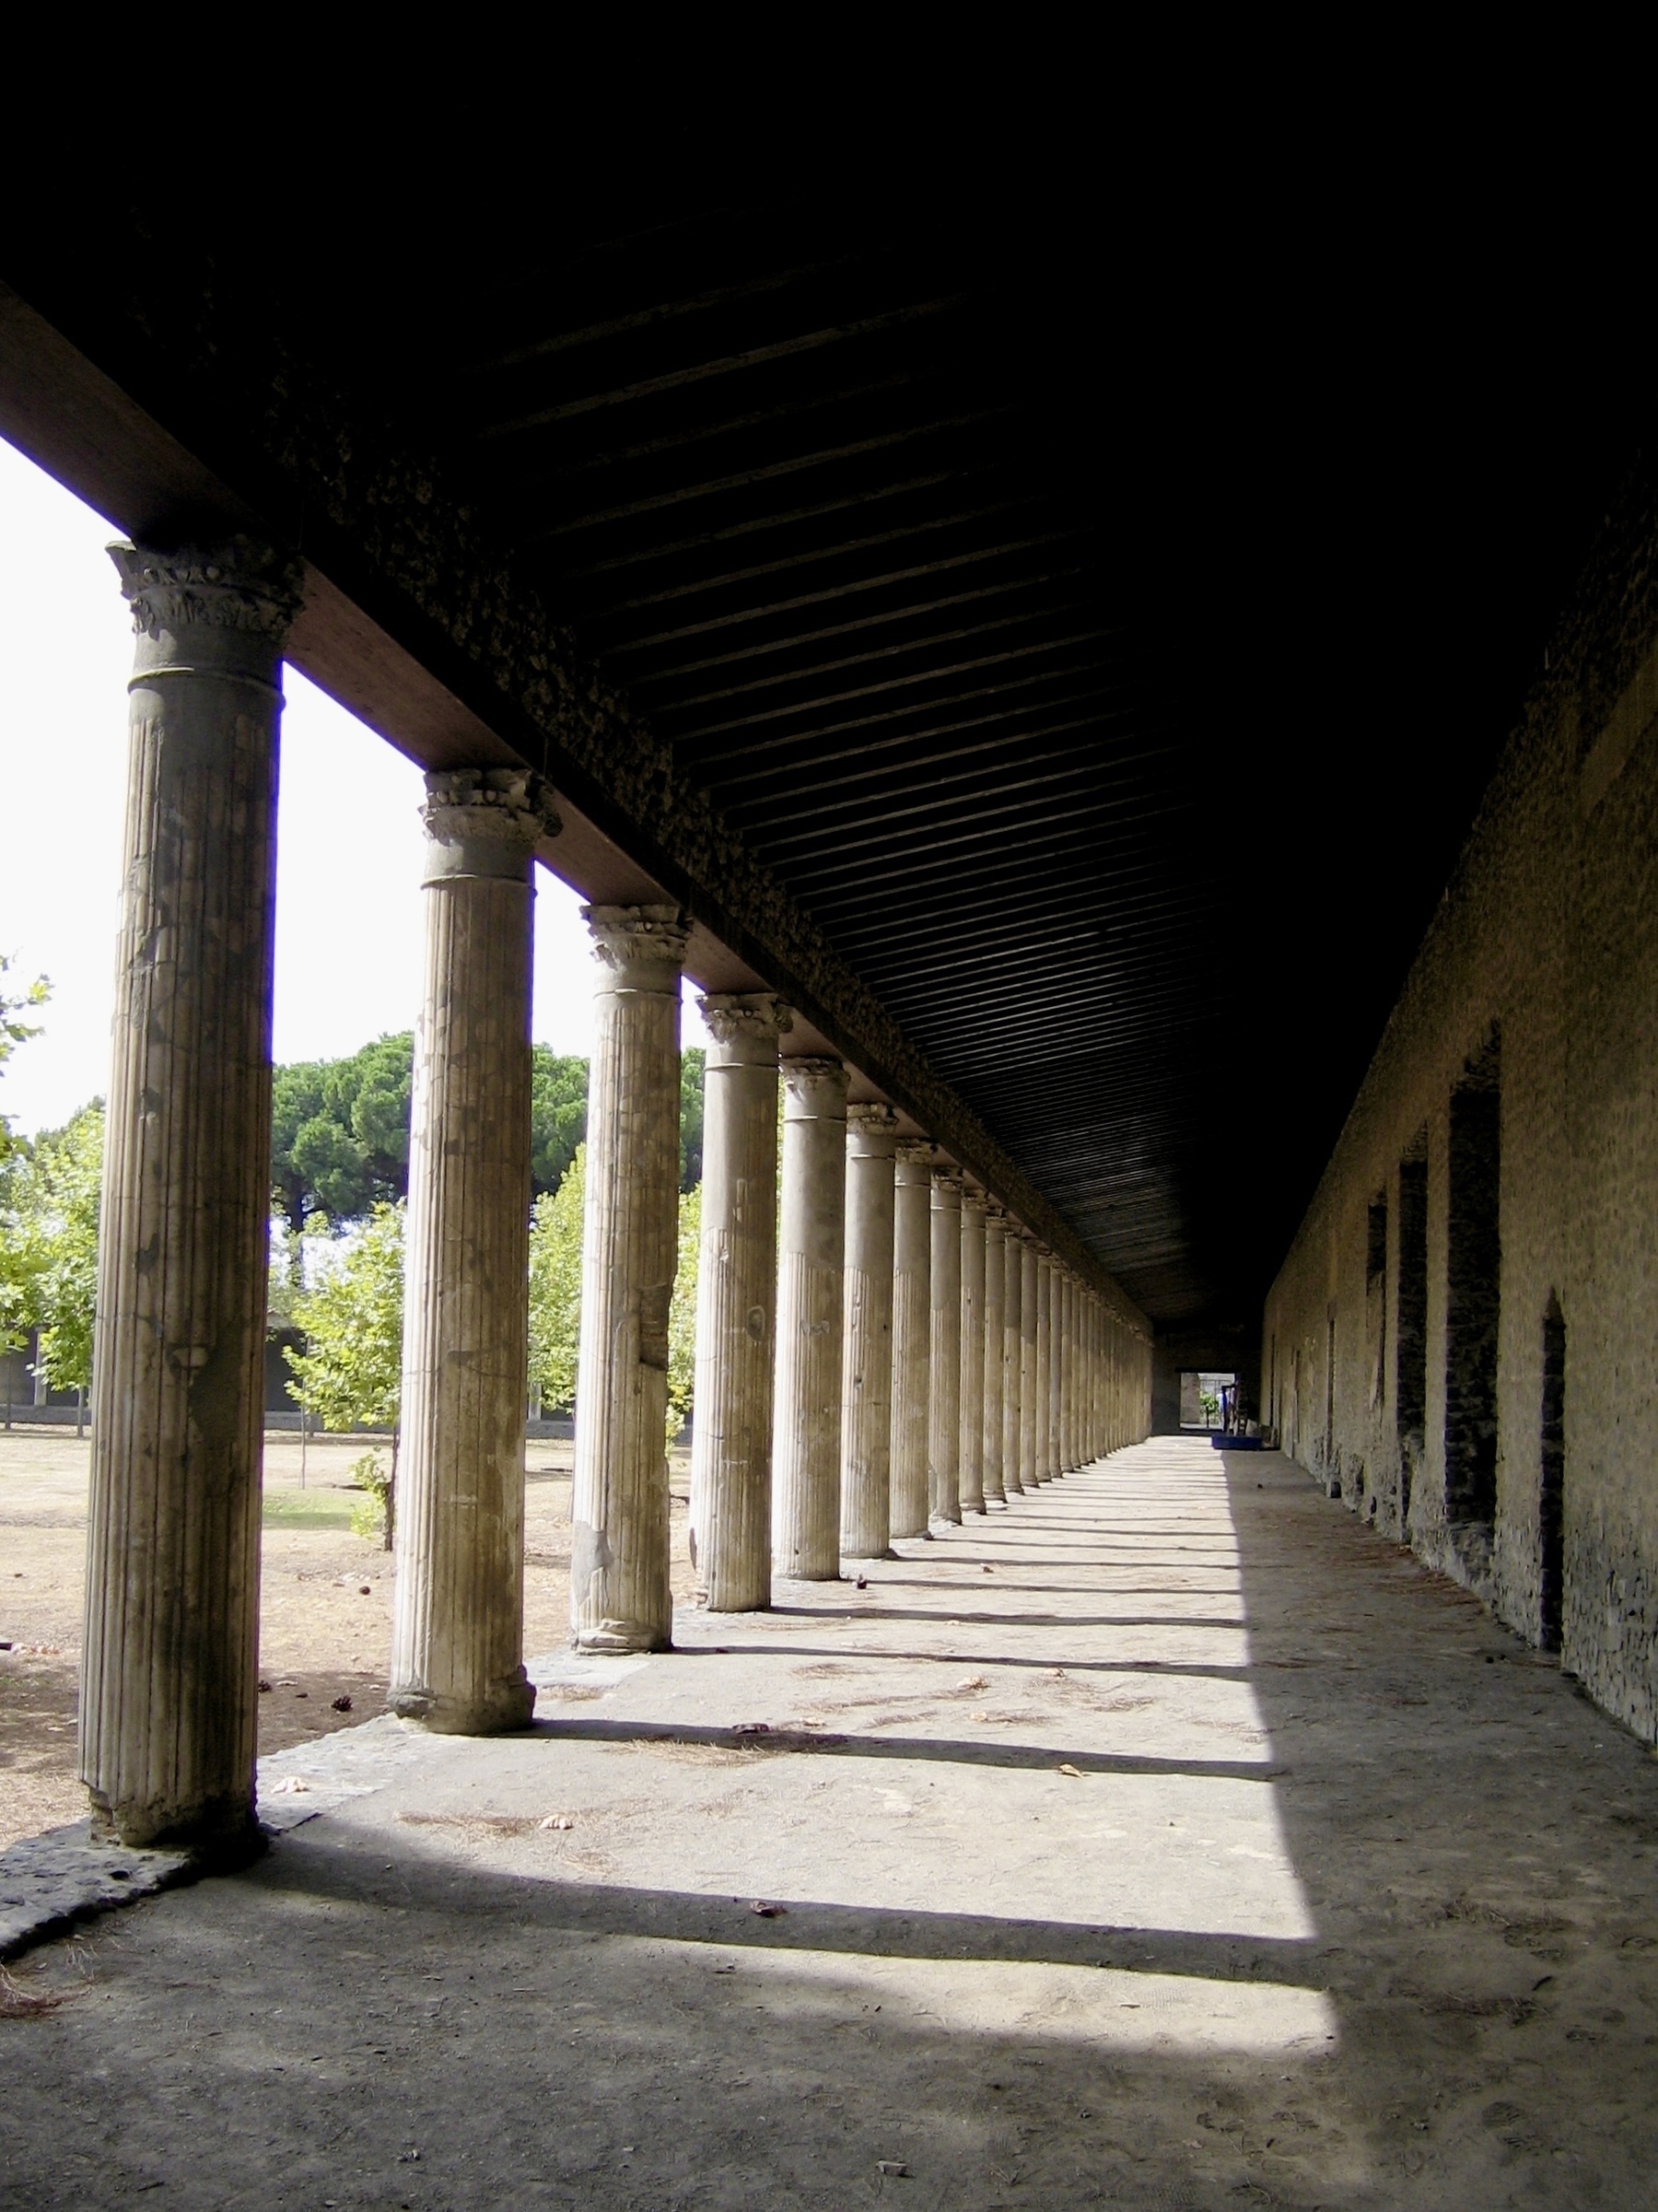 A long portico framed by stone columns stretches into the distance, sunlight streaming through the columns creating stark shadows down its length.